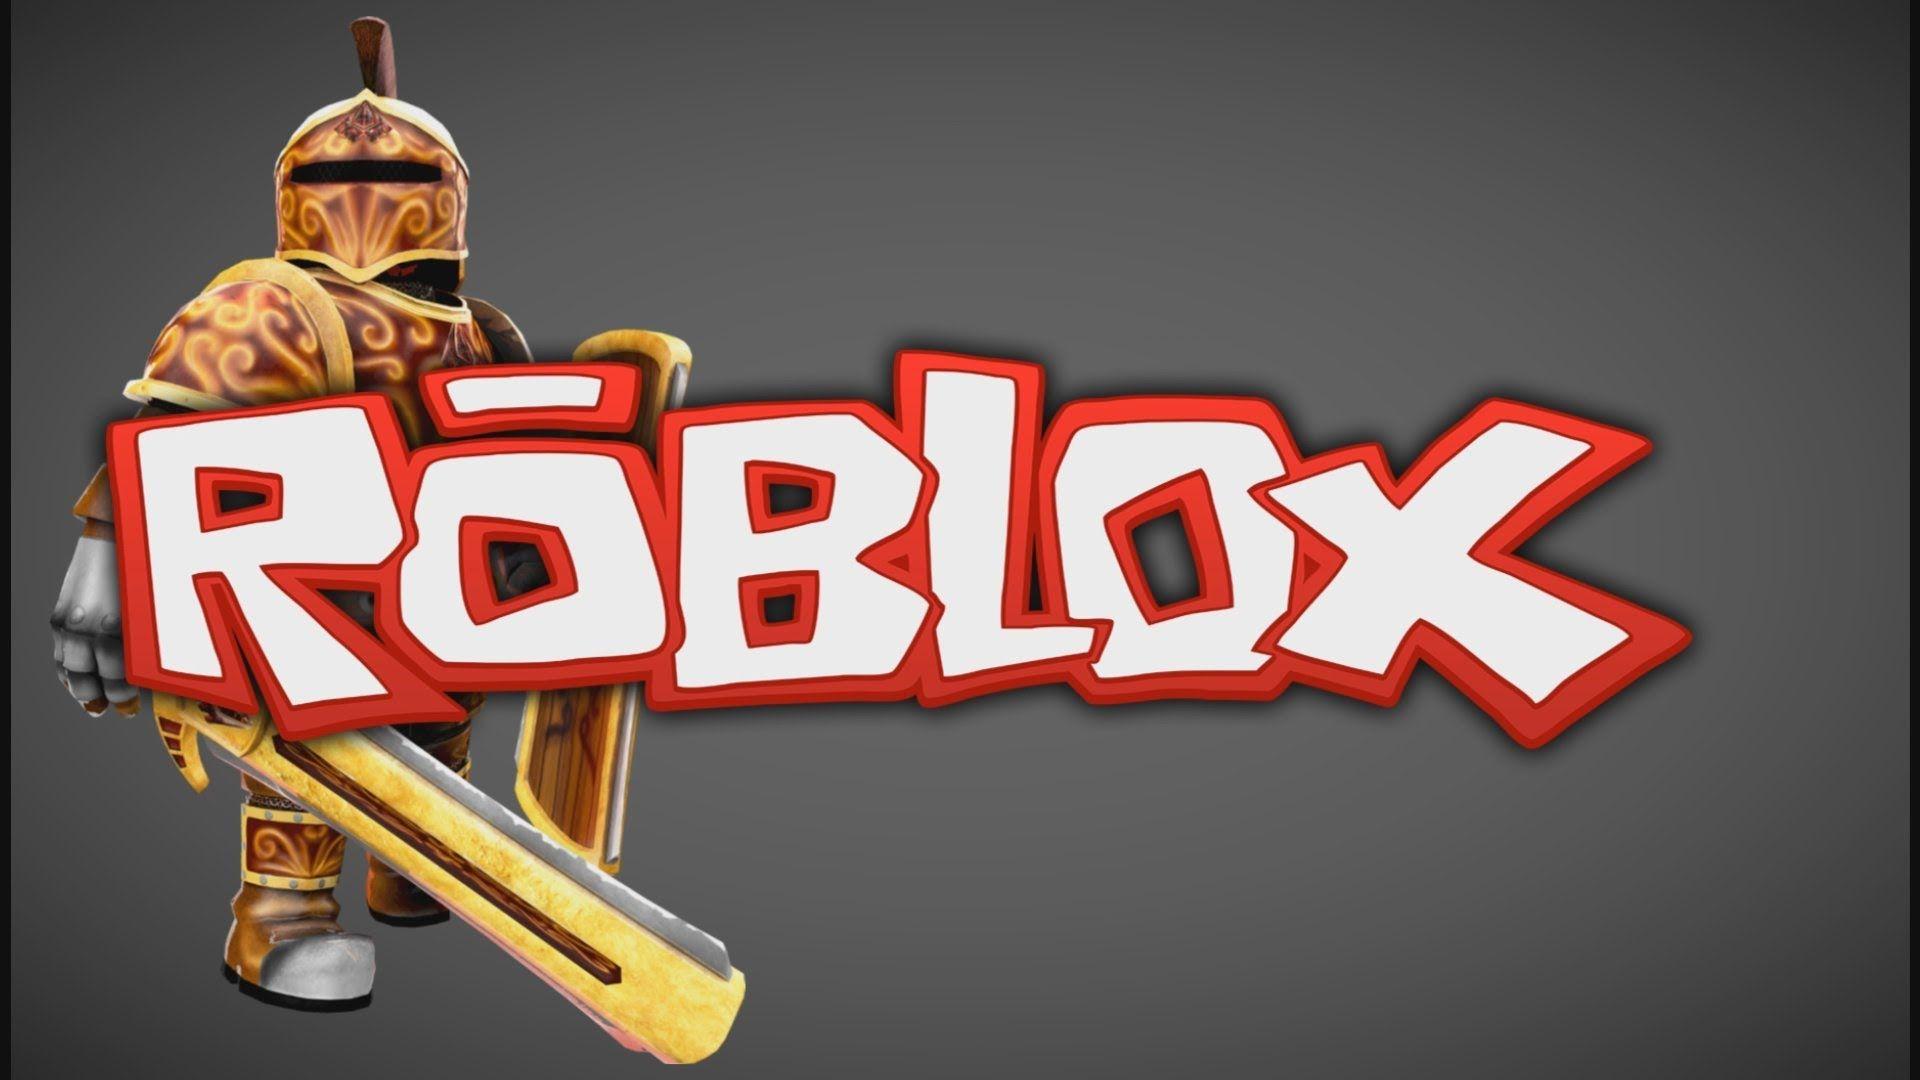 Roblox Pc Wallpapers Top Free Roblox Pc Backgrounds Wallpaperaccess - roblox wallpapers hd on windows pc download free 1 0 com robloxwallpaper devtrack